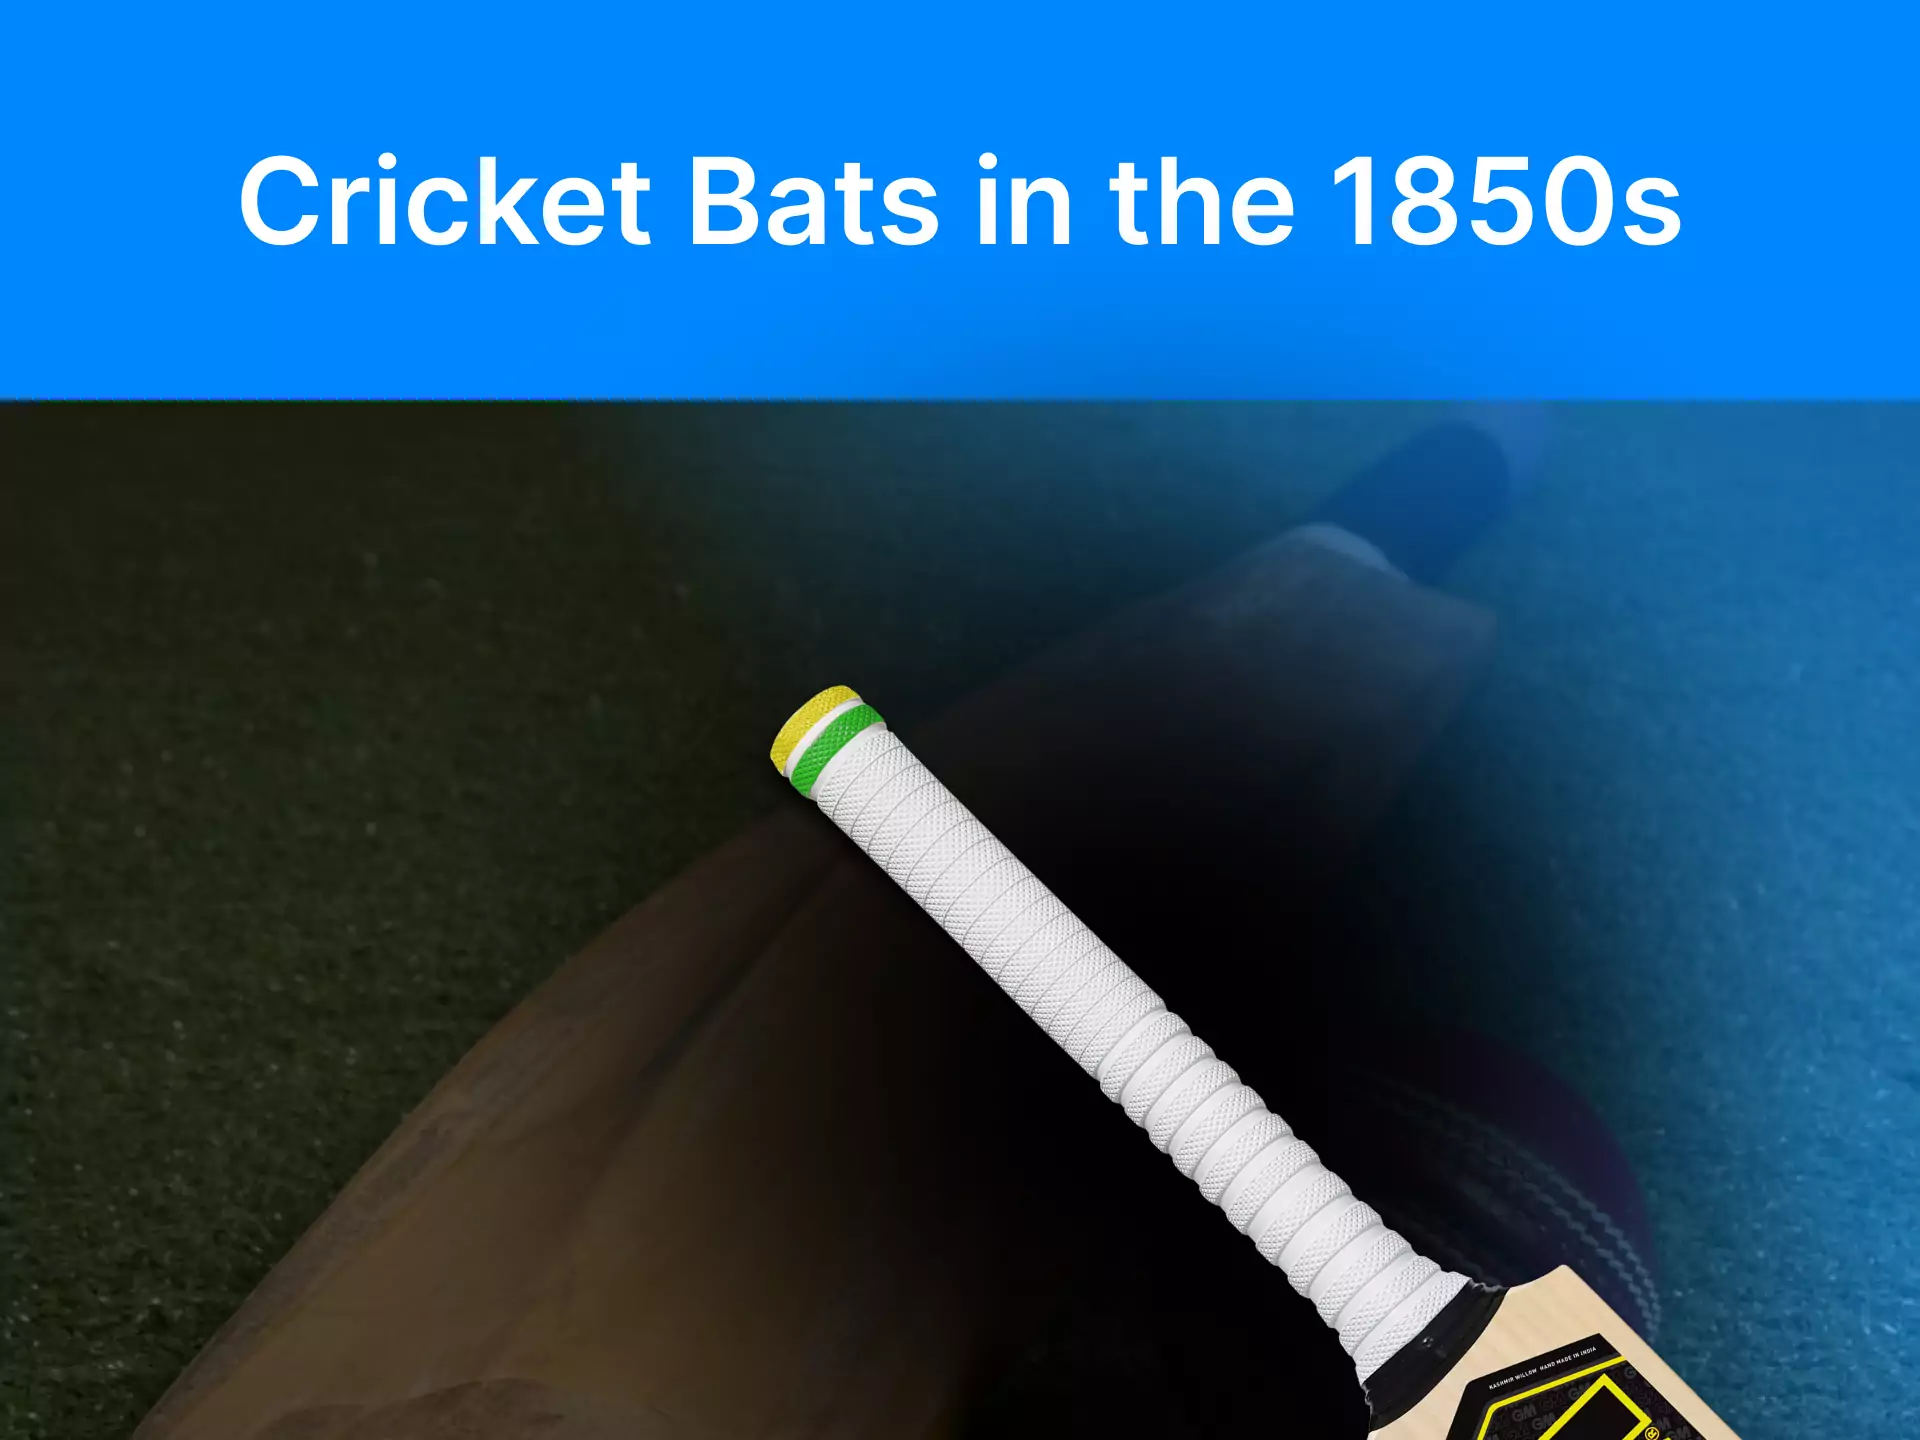 Find out what cricket bats were like in the 1850s.